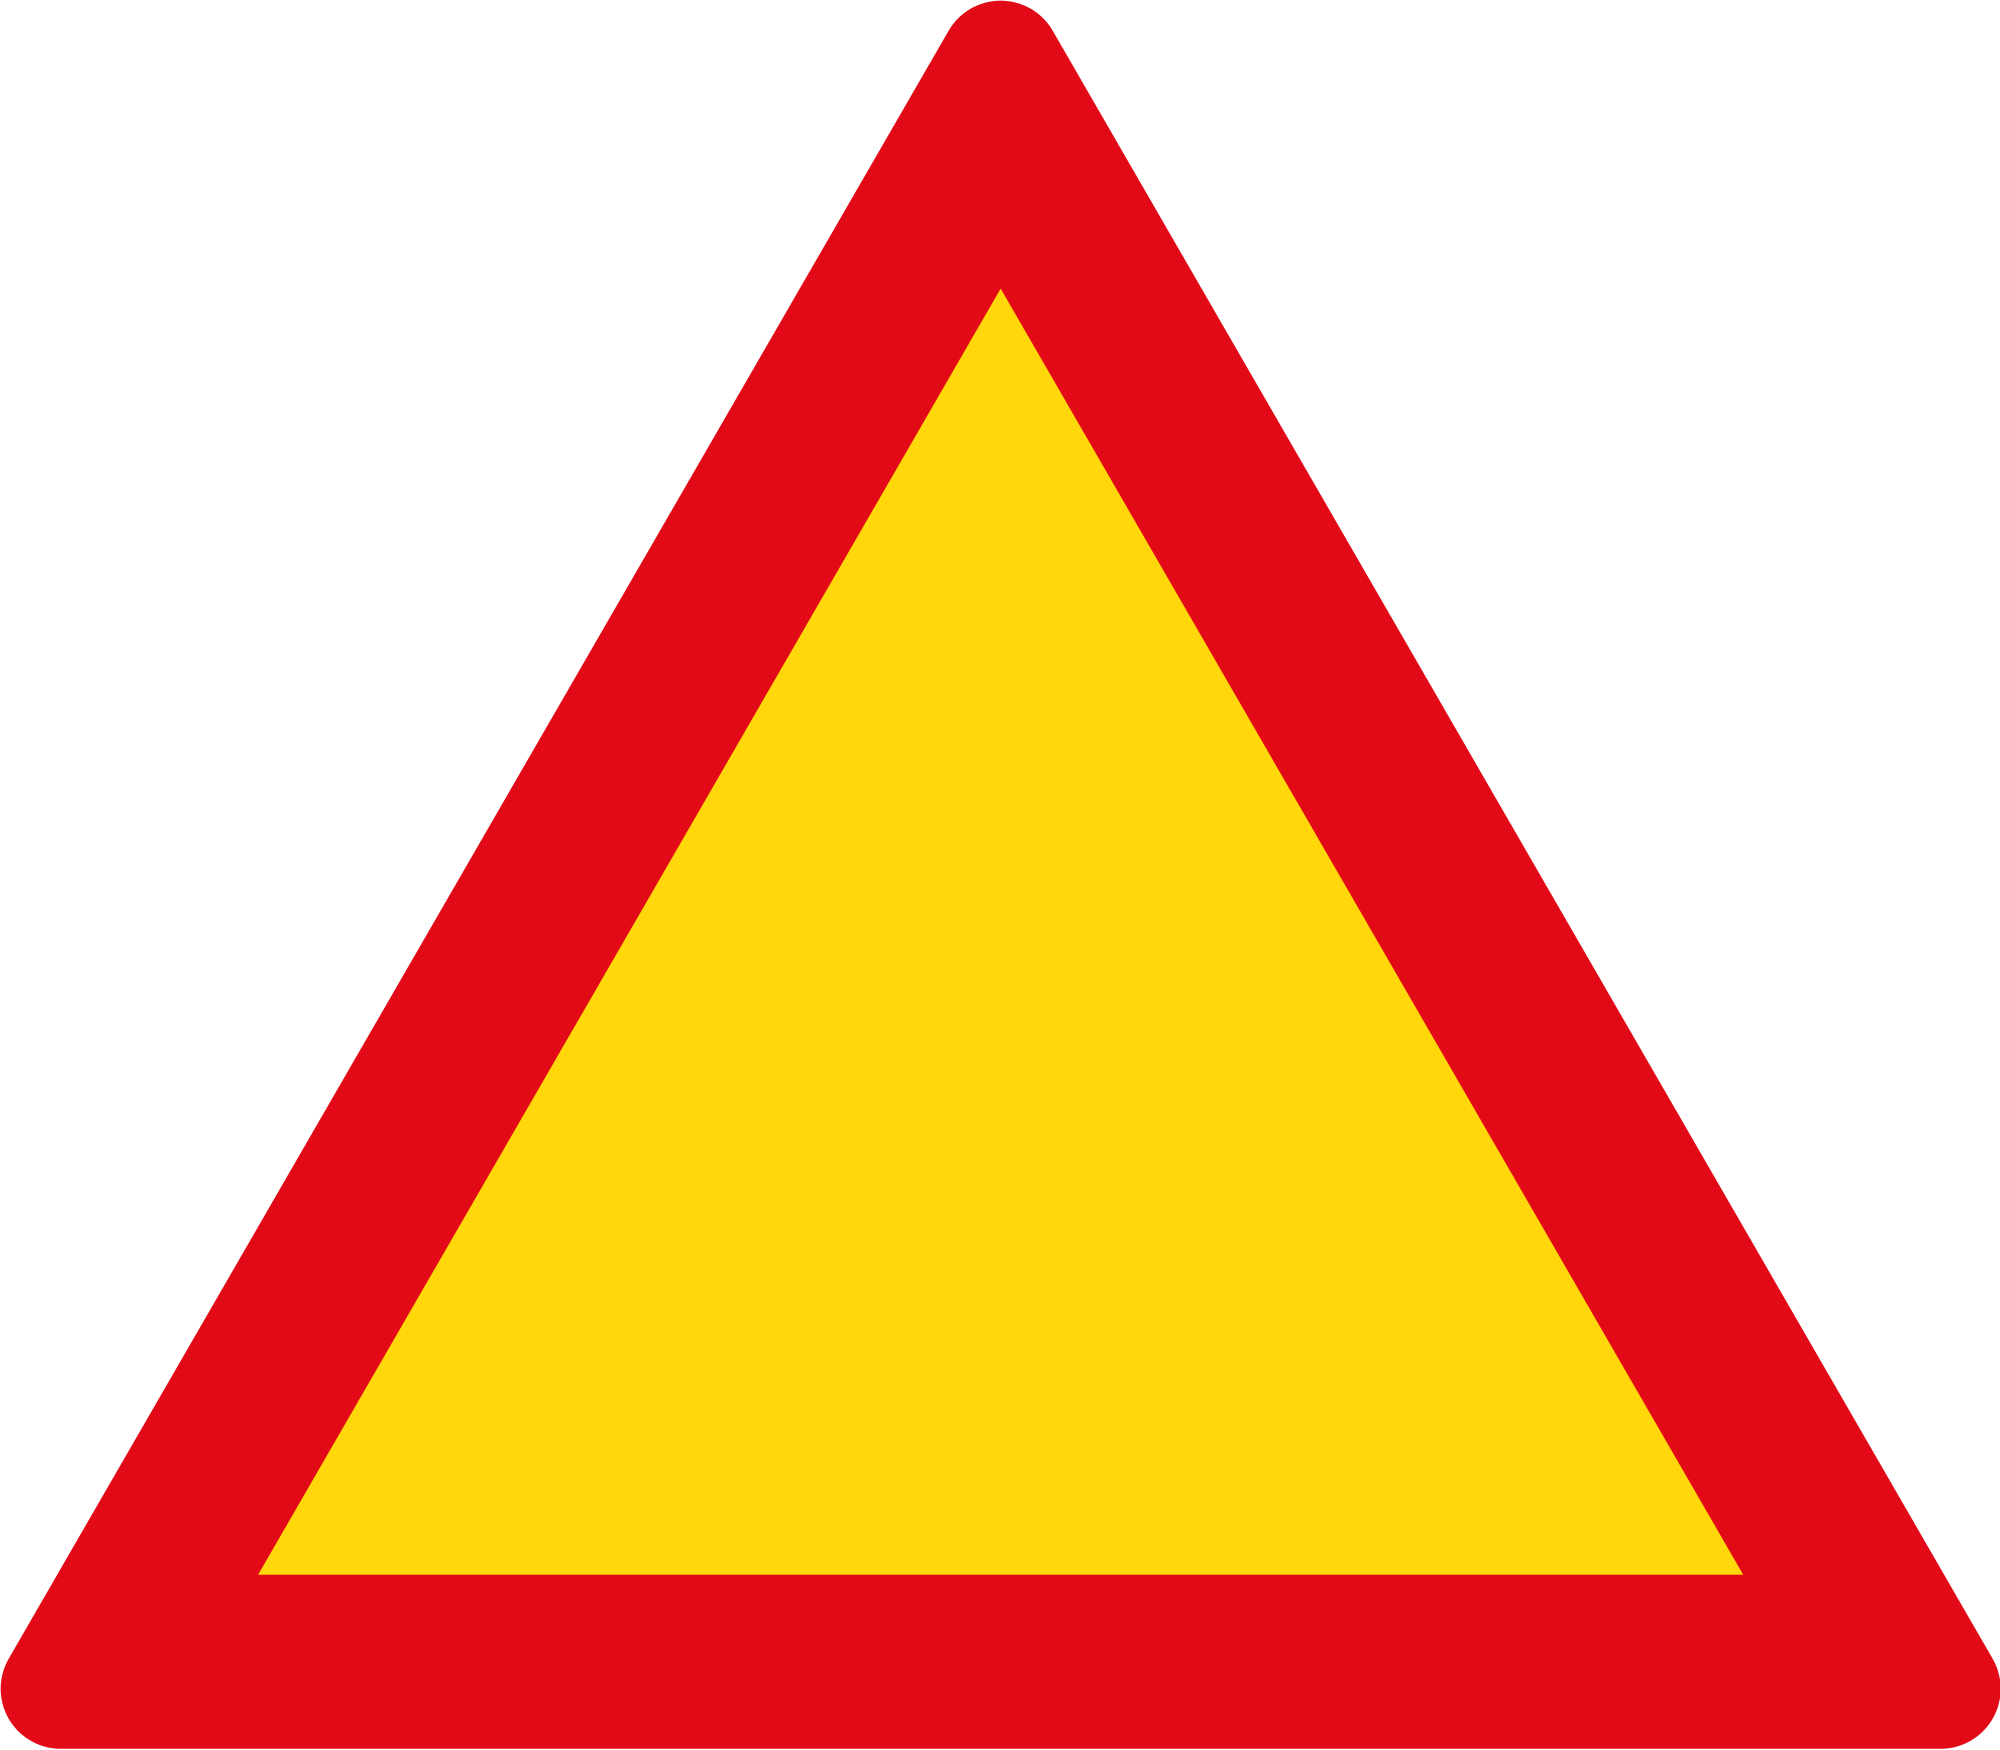 File:Triangle warning sign (red and yellow).svg